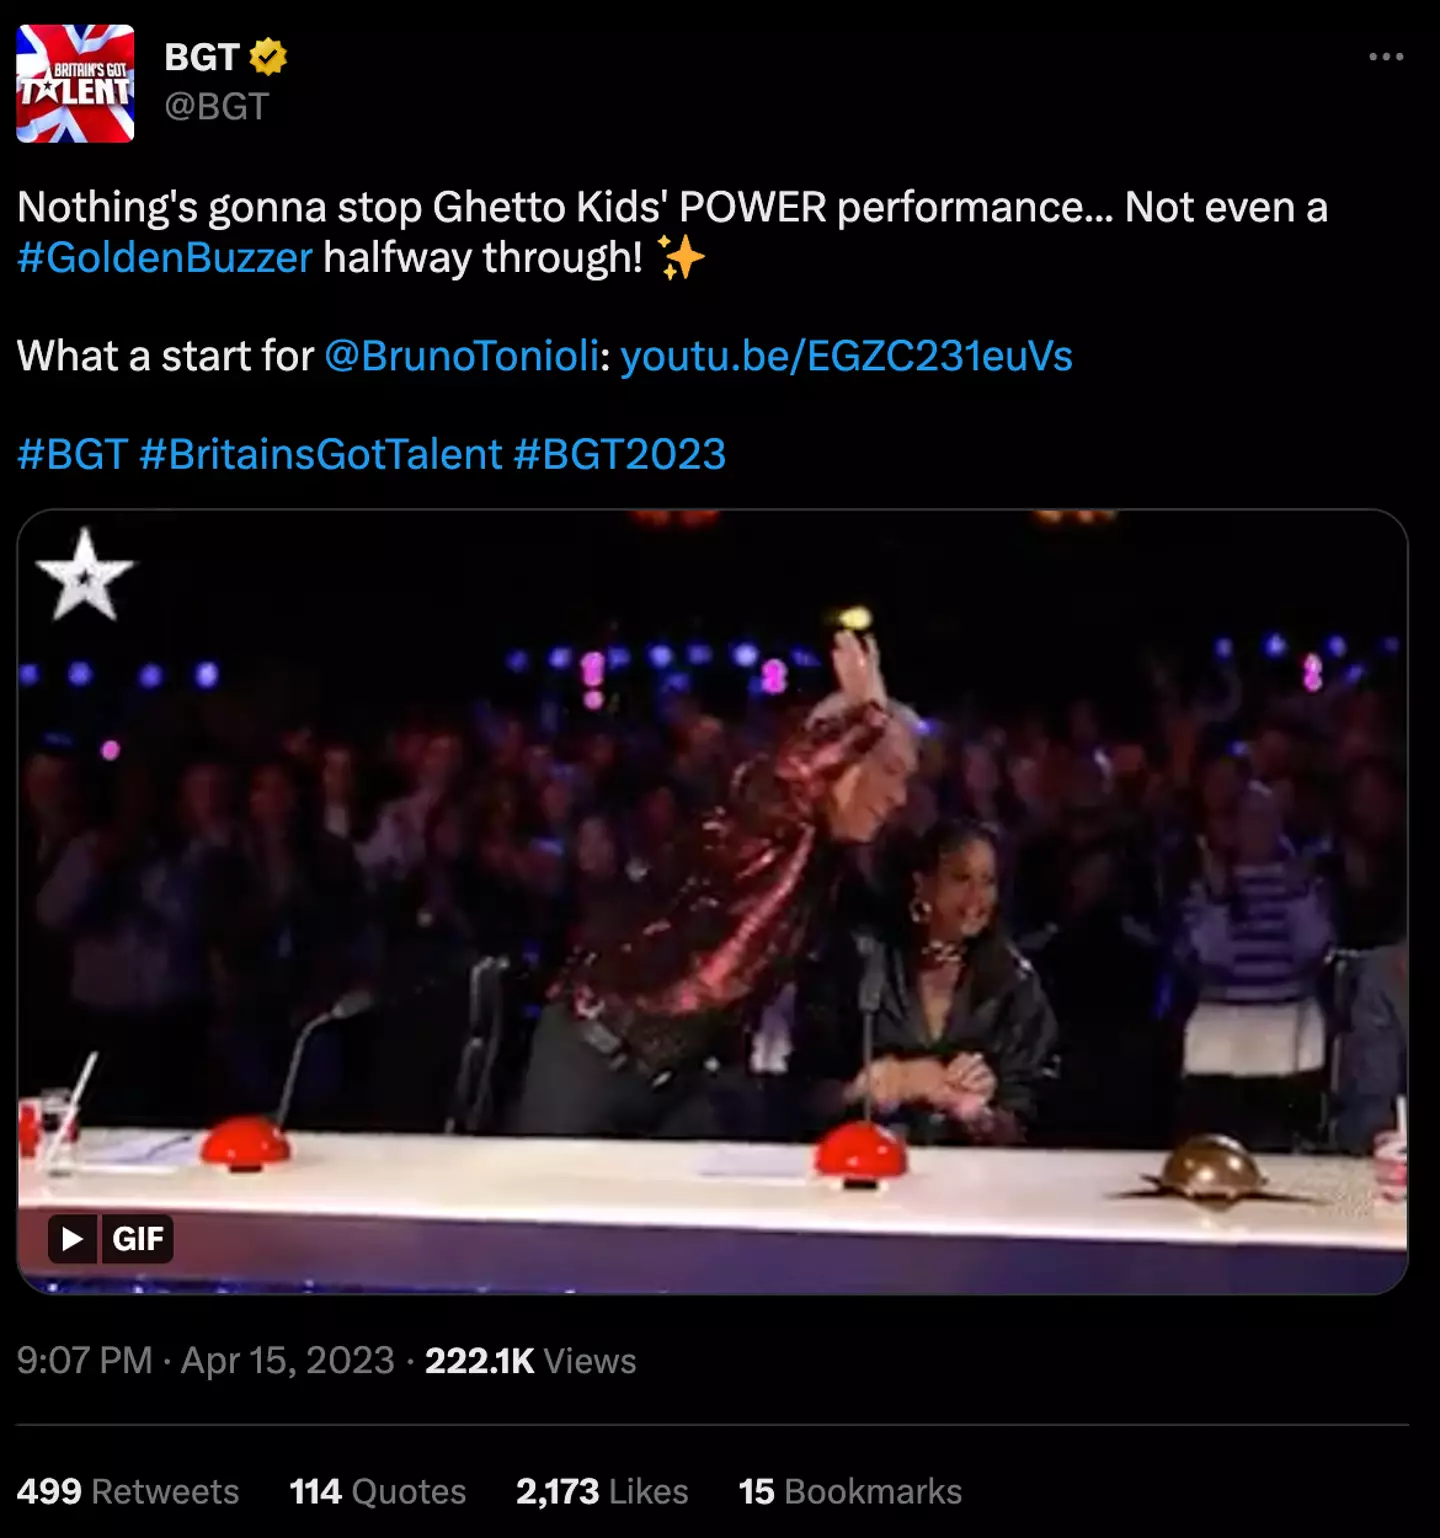 Thankfully, neither Ghetto Kids or Simon Cowell seemed to be too fazed by Tonioli's incorrect use of the golden buzzer.